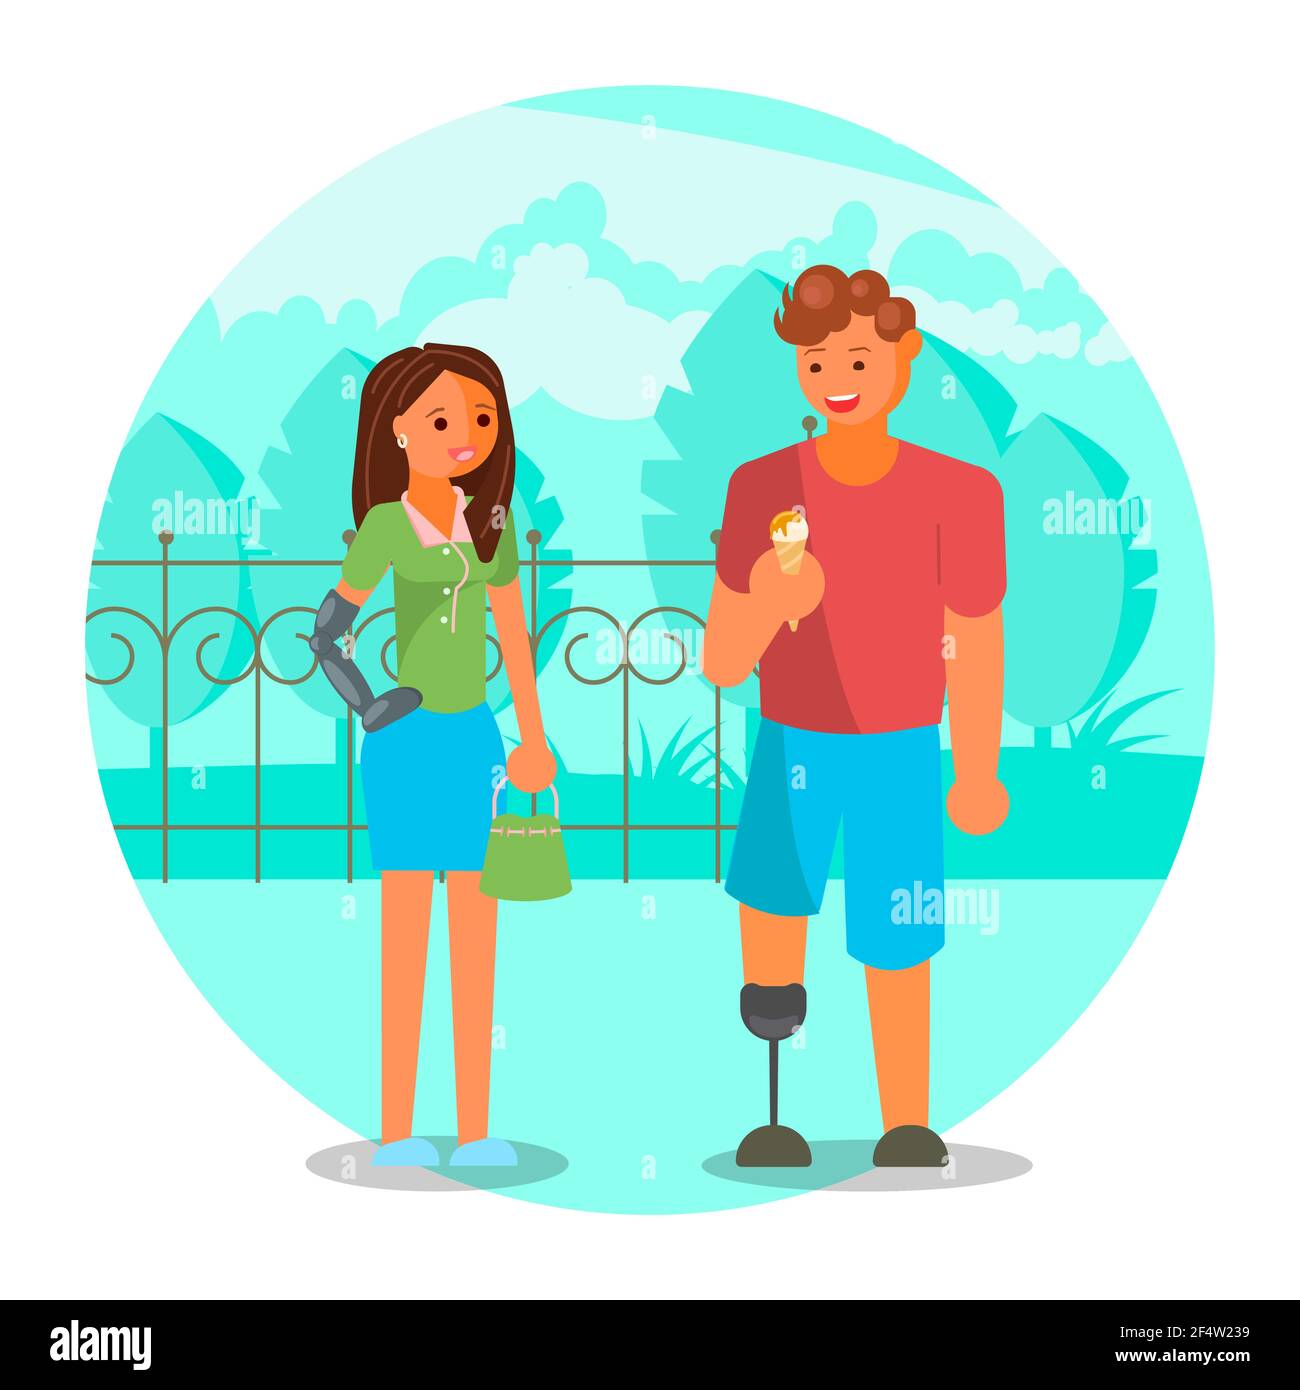 Couple with leg and arm prosthetics, flat vector illustration. Disabled people lifestyle, relationship, romantic date. Stock Vector